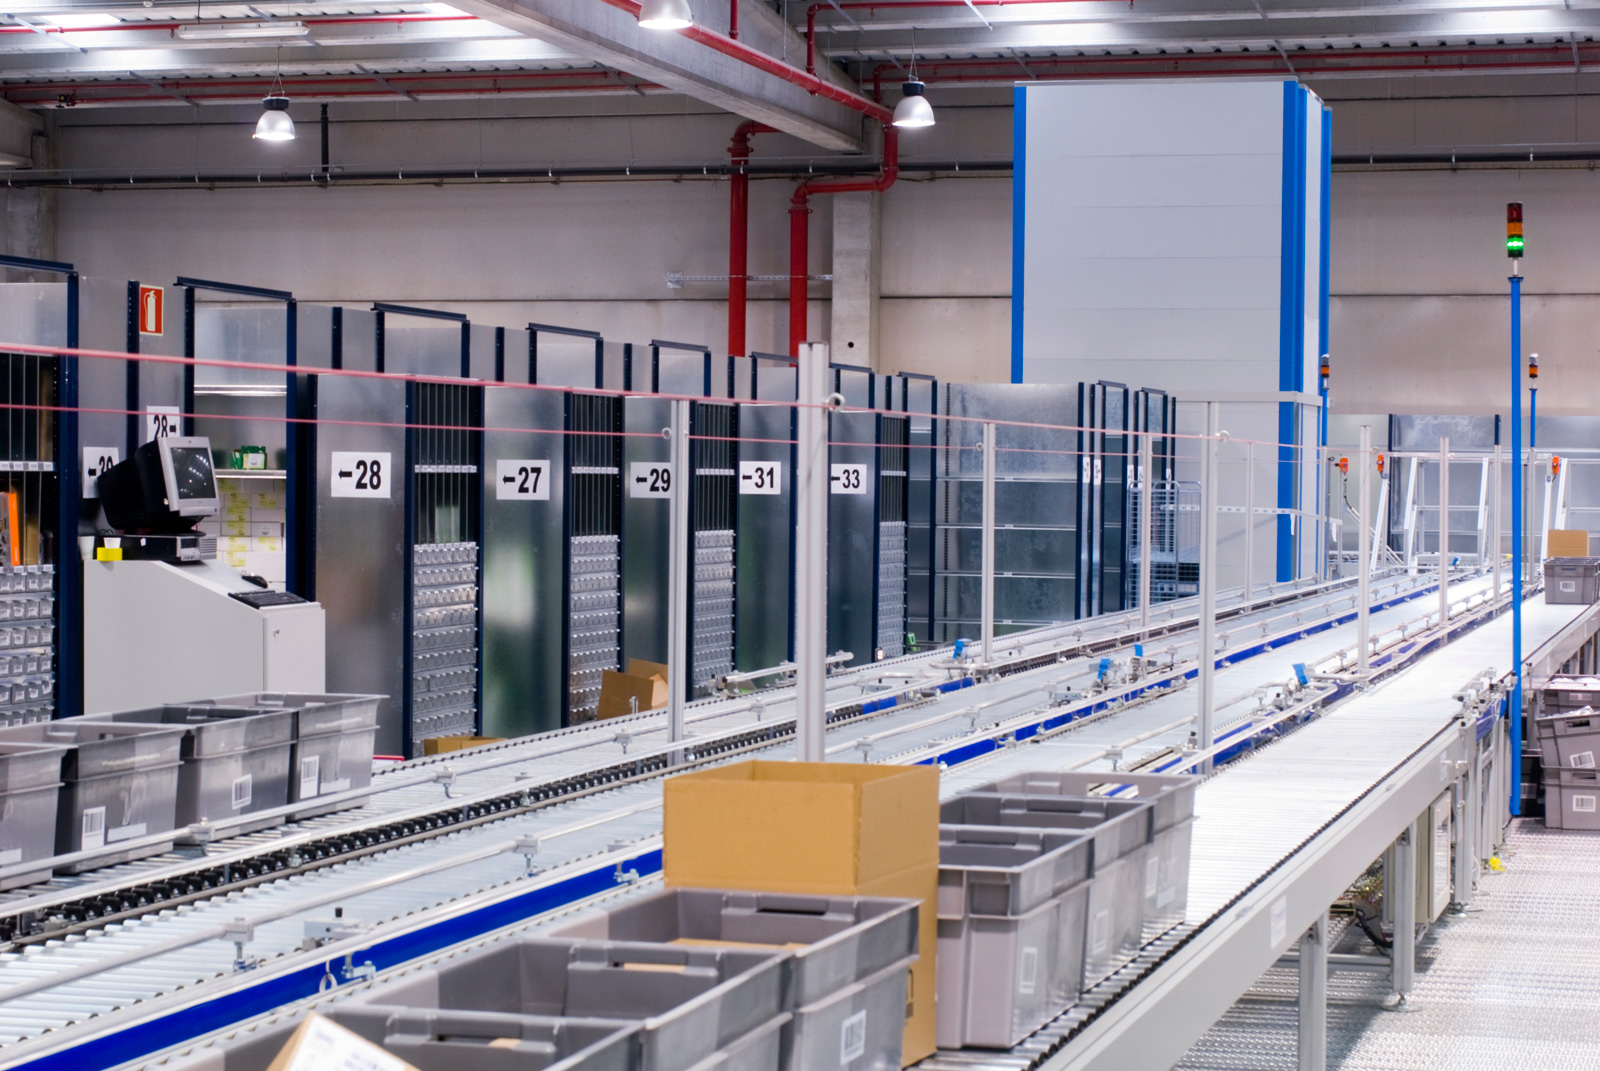 Motorized Roller Conveyors: A Better Option for Small- and Medium-Sized Businesses